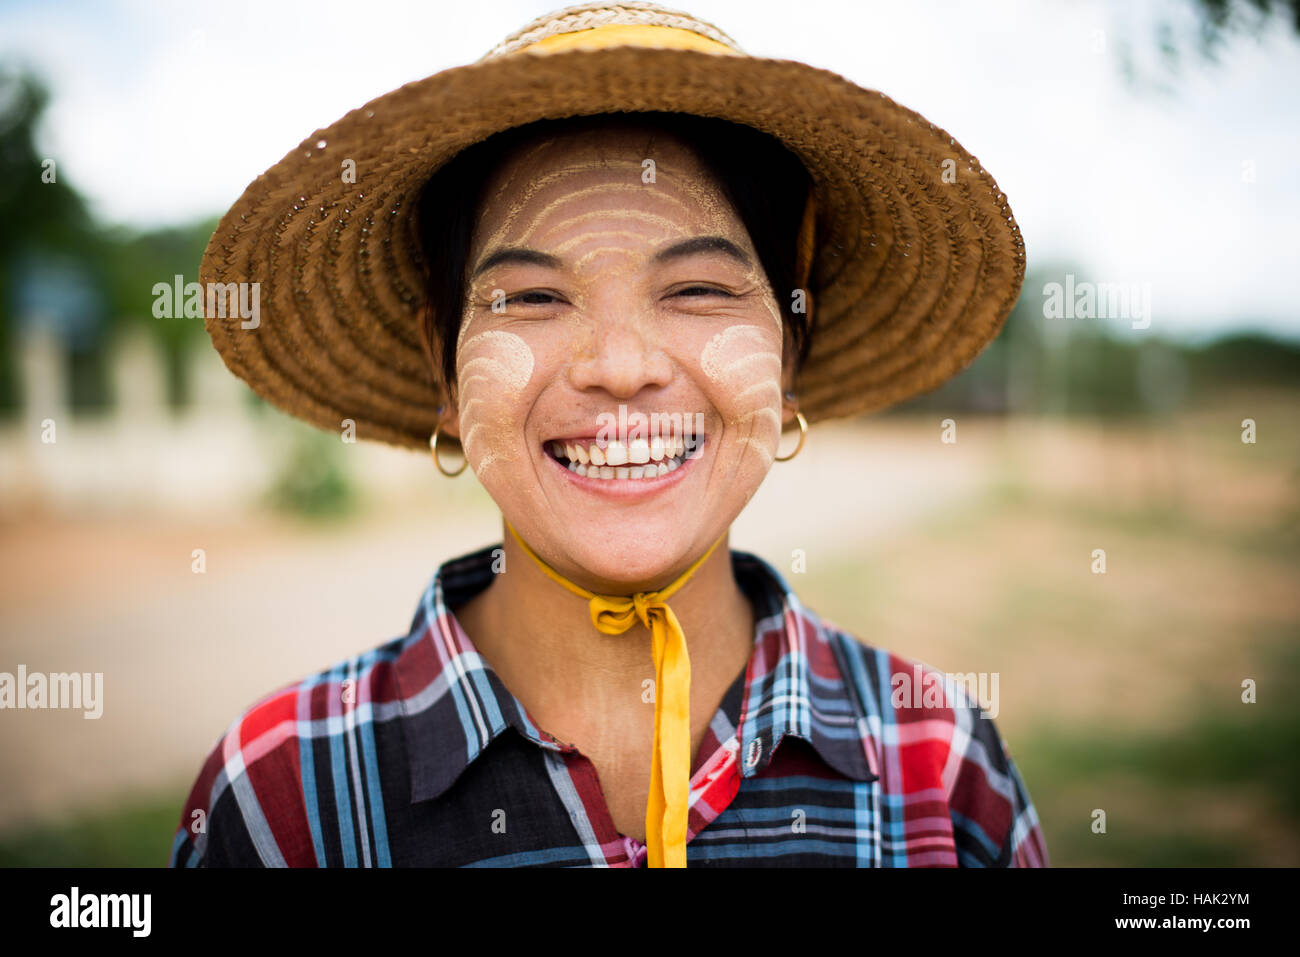 BAGAN, Myanmar - A local guide in Minnanthu Village in Bagan, Myanmar. Set amidst the archeological ruins of the Plain of Bagan, the tiny Minnanthu Village retains the traditional way of life. Stock Photo